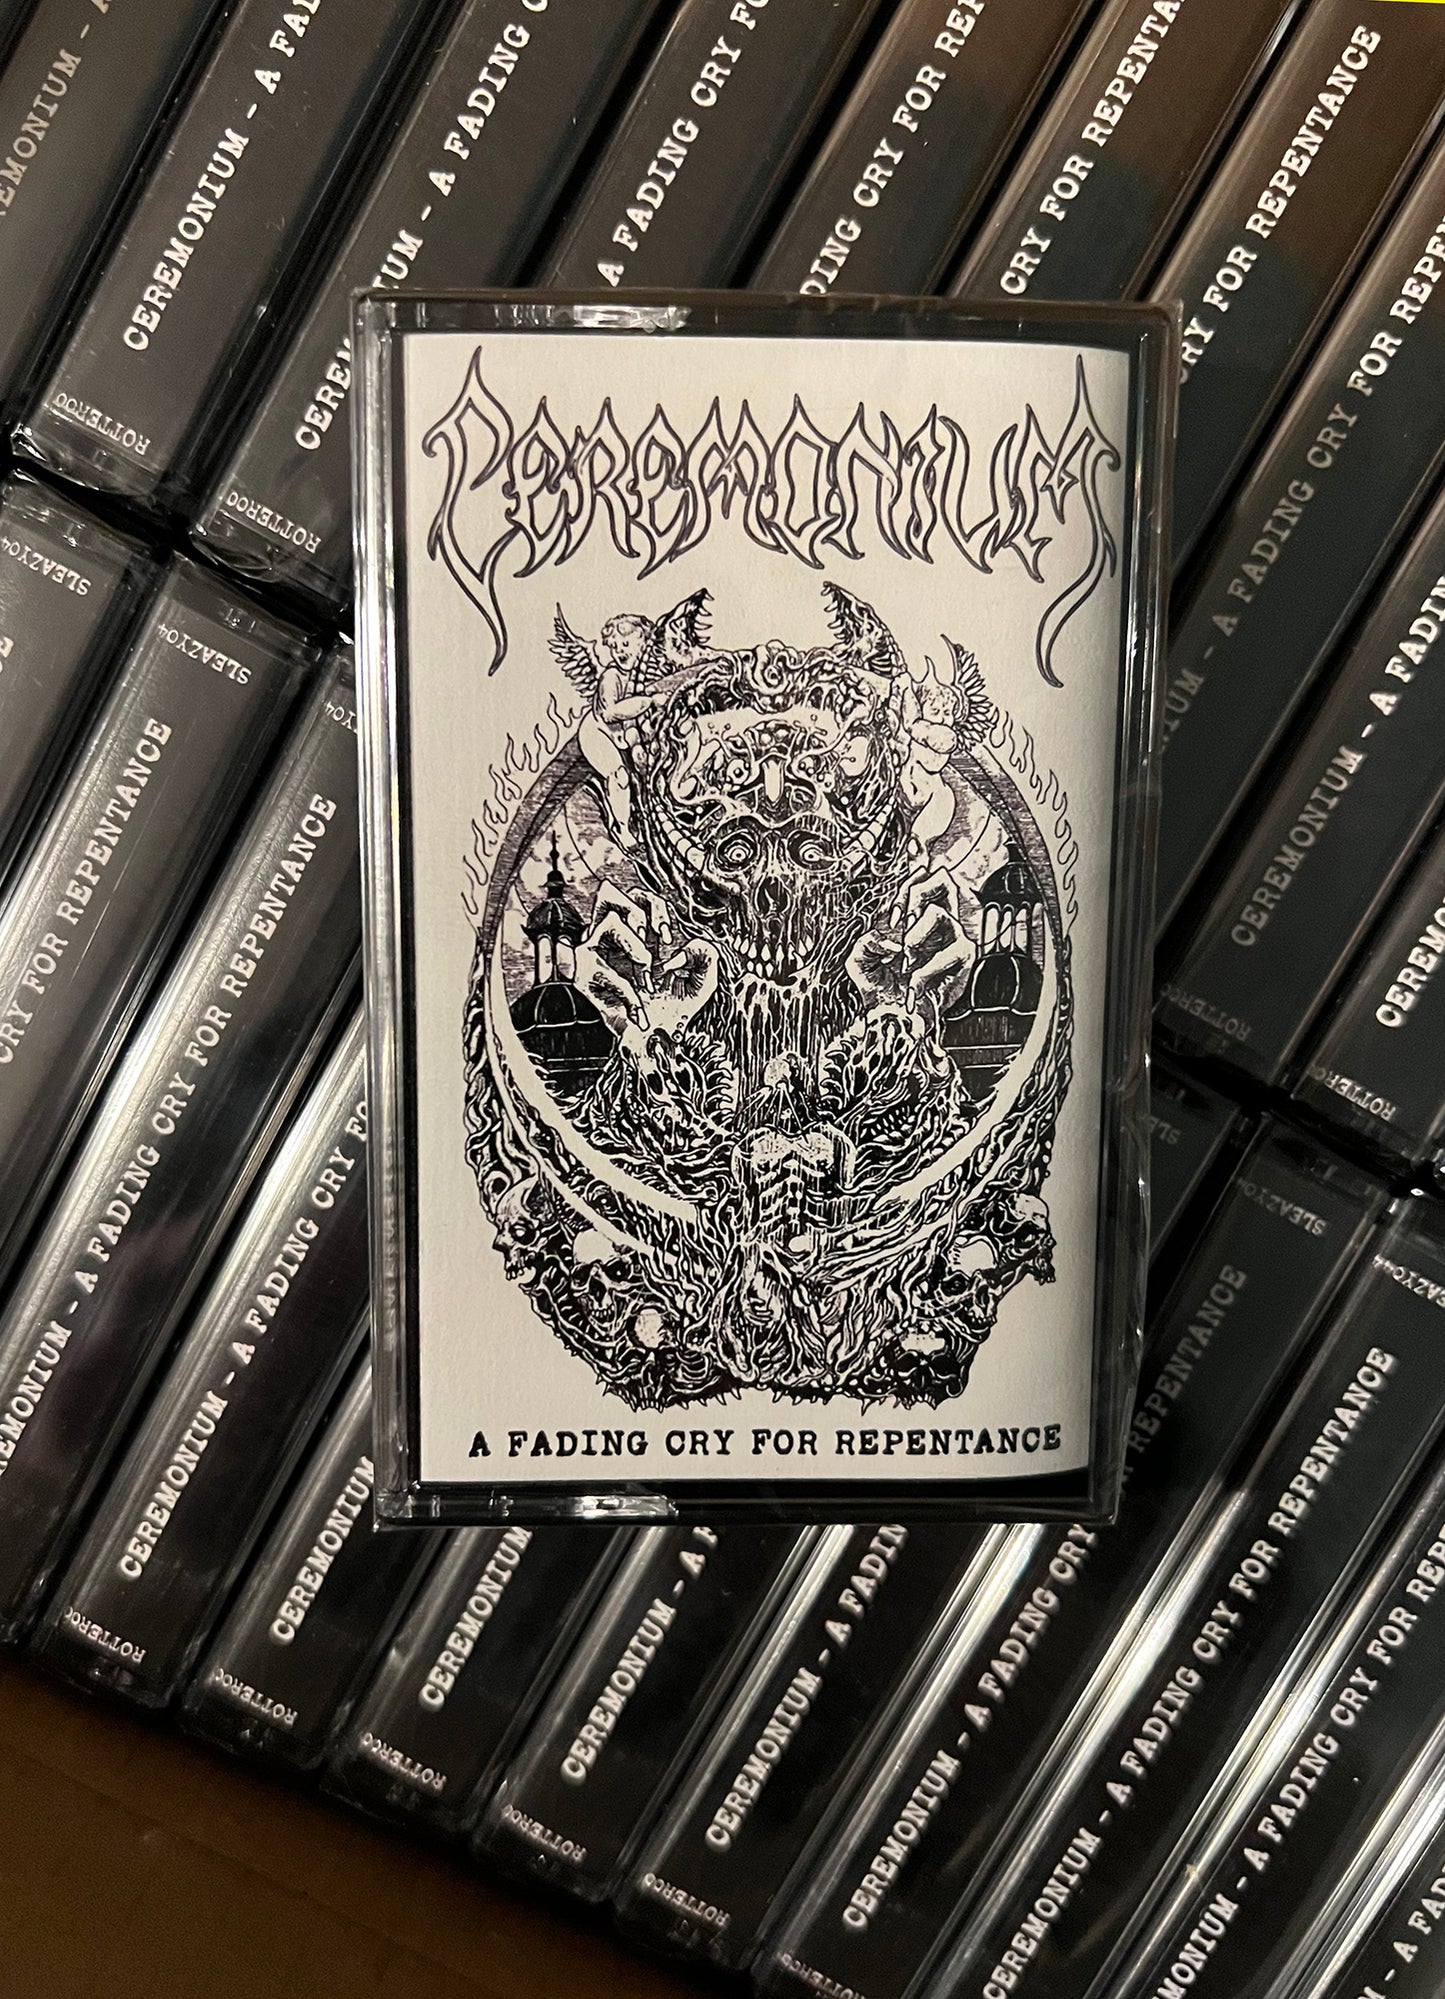 Ceremonium " A Fading Cry For Repentance " Cassette tape